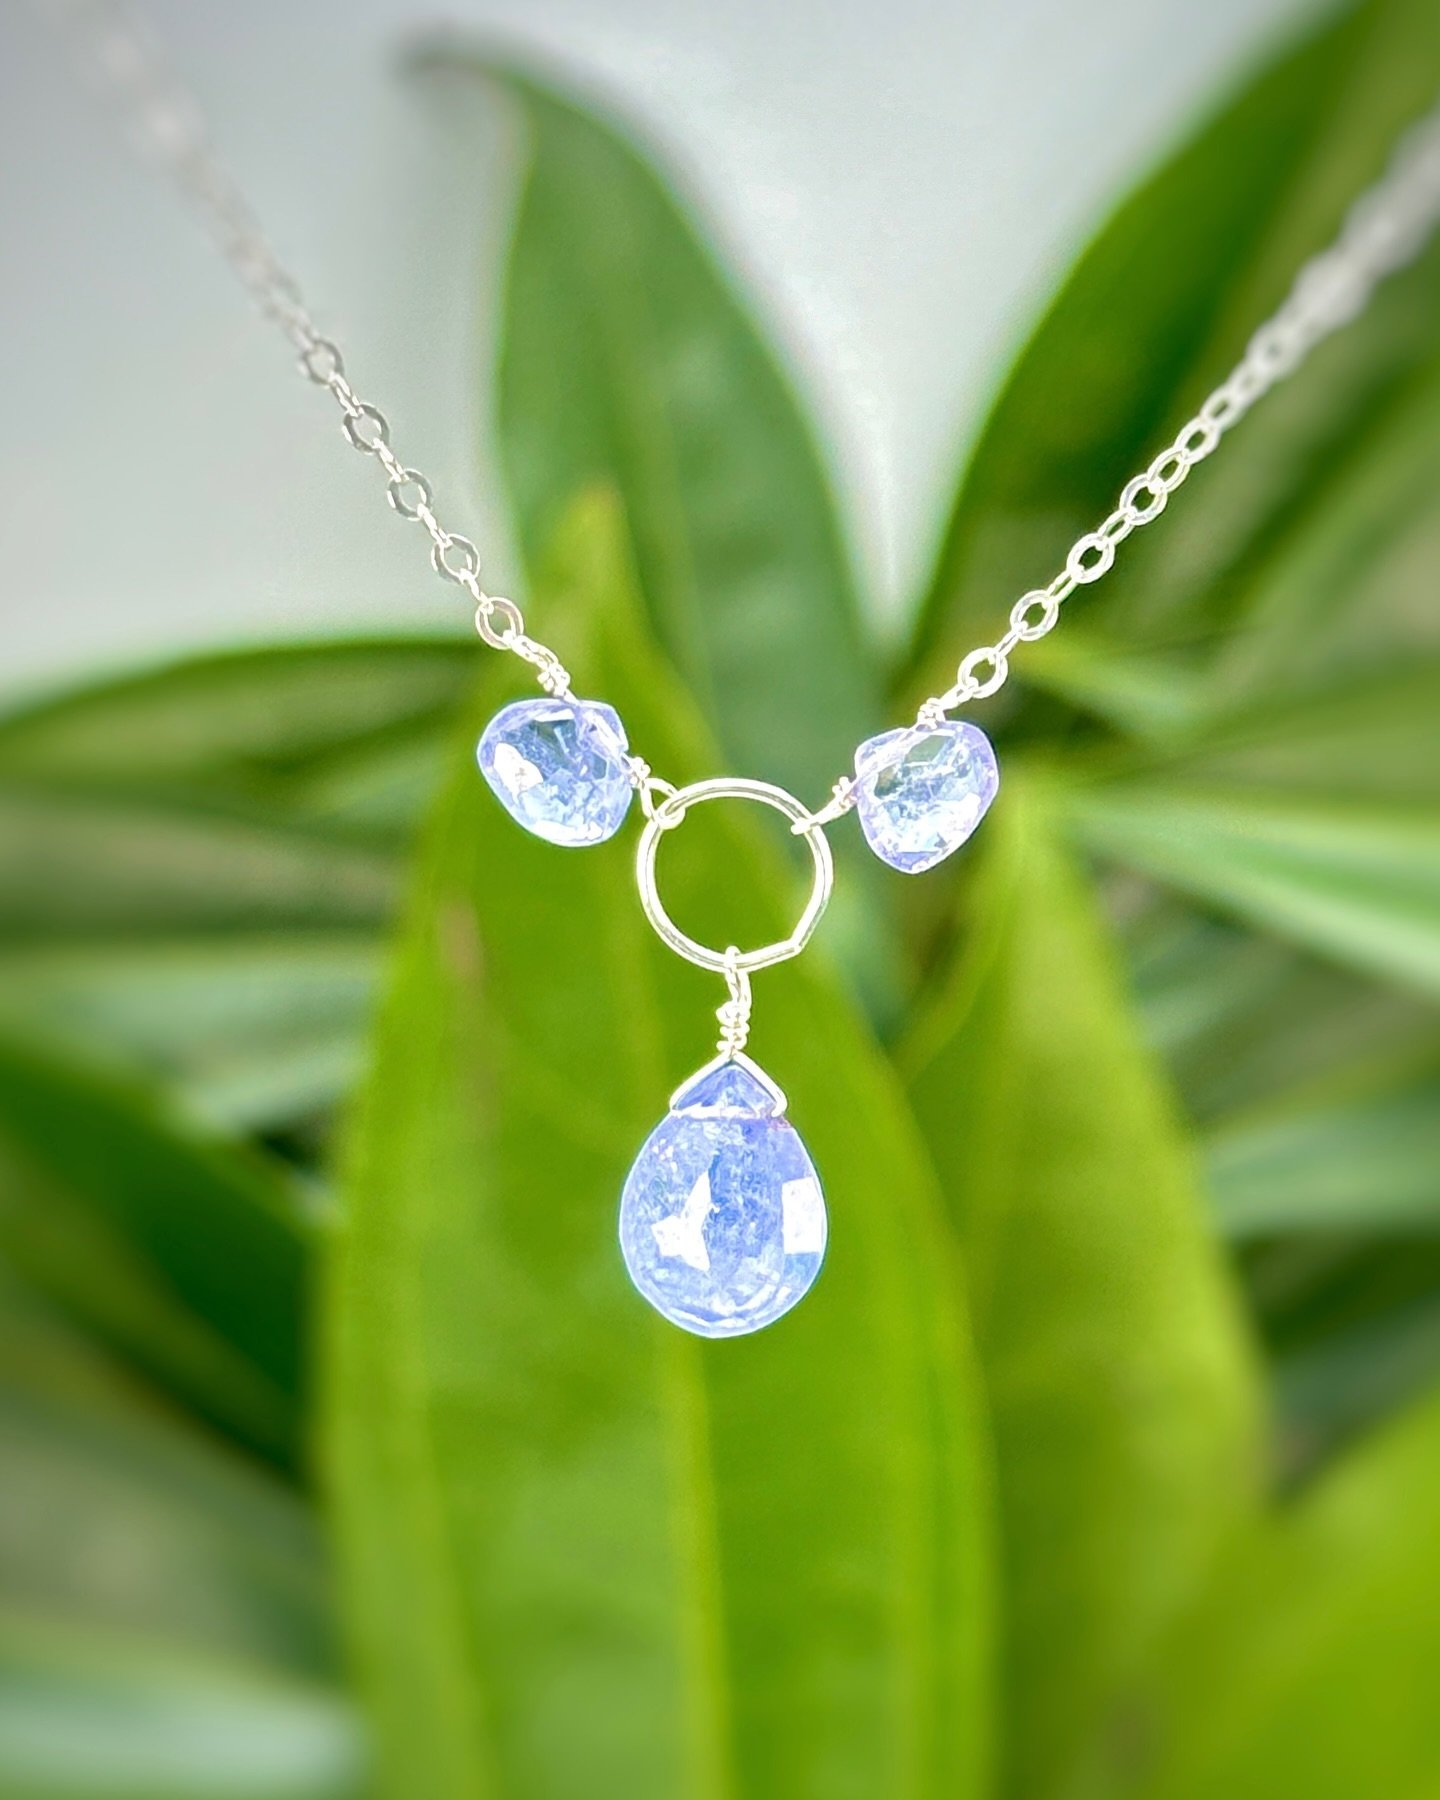 The Peony Necklace in Tanzanite!